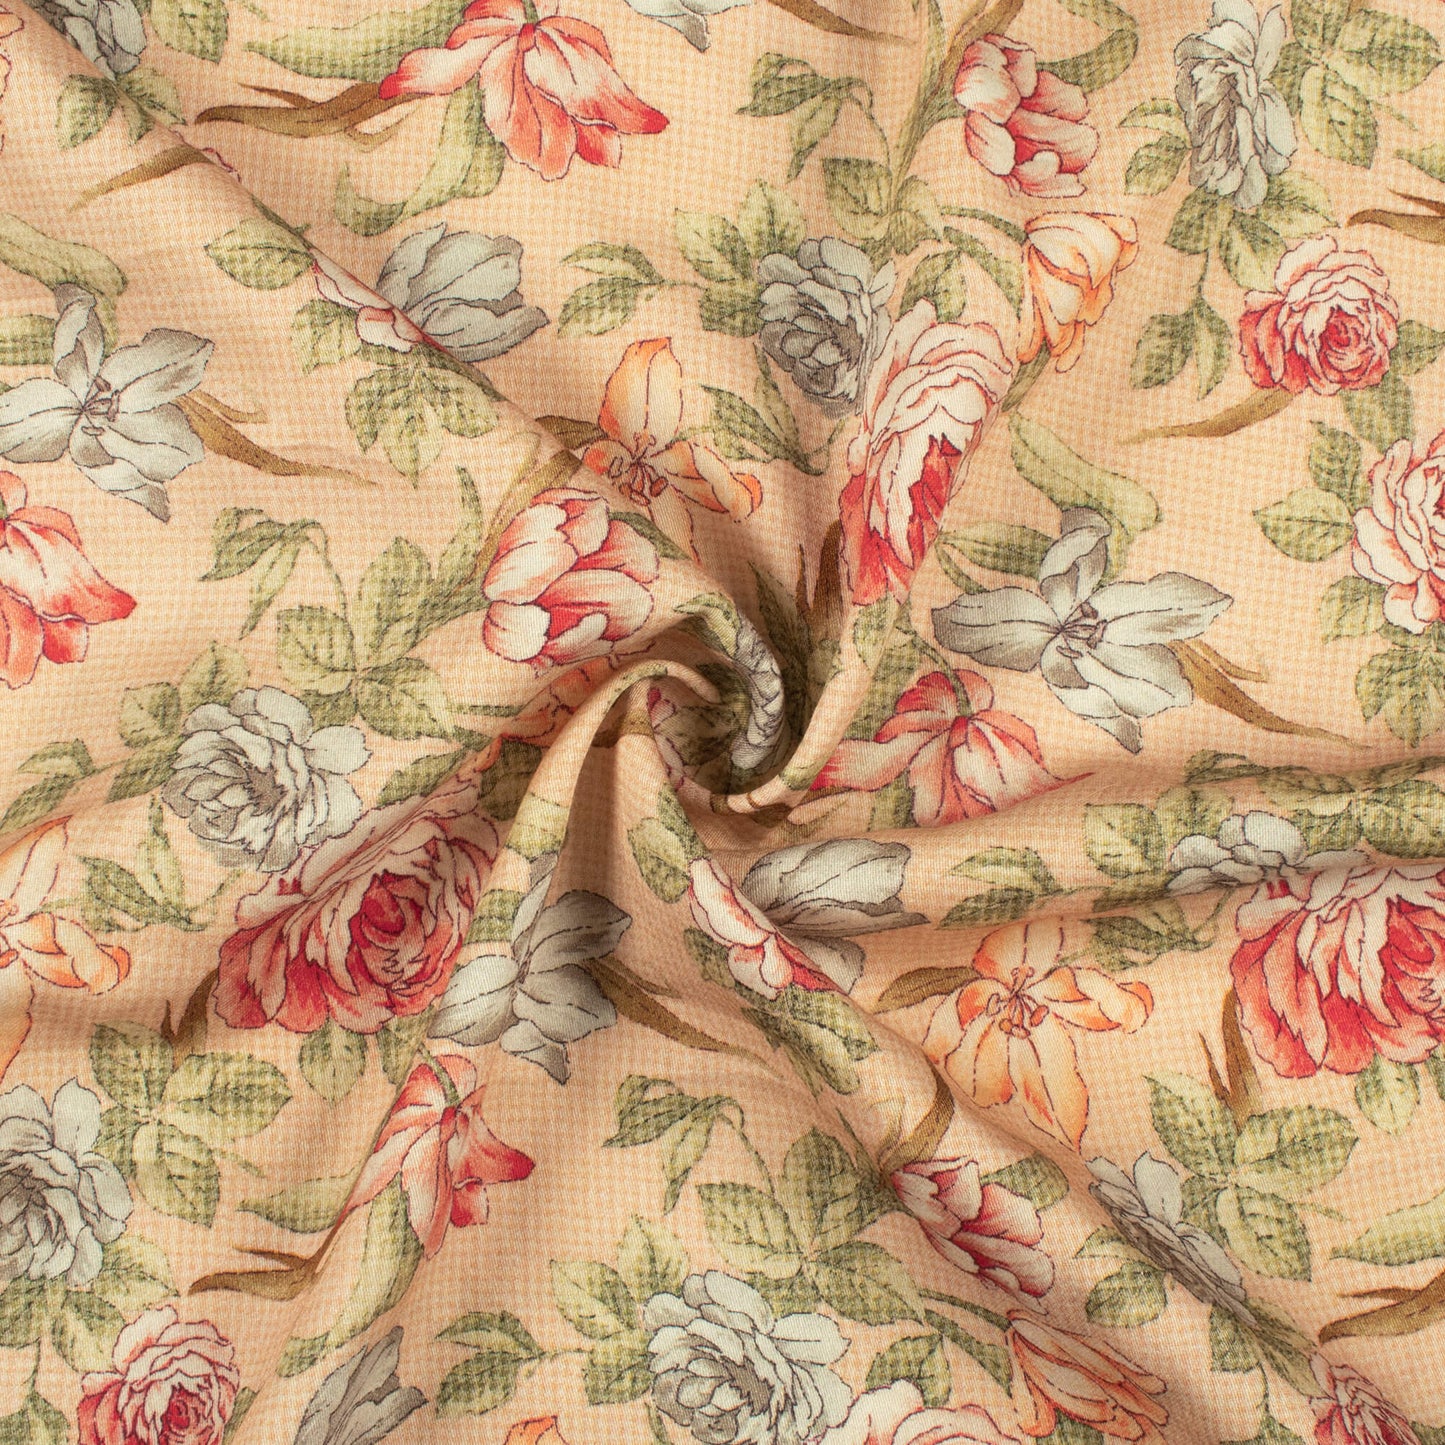 Pale Orange And Red Floral Digital Print Viscose Rayon Fabric(Width 58 Inches)